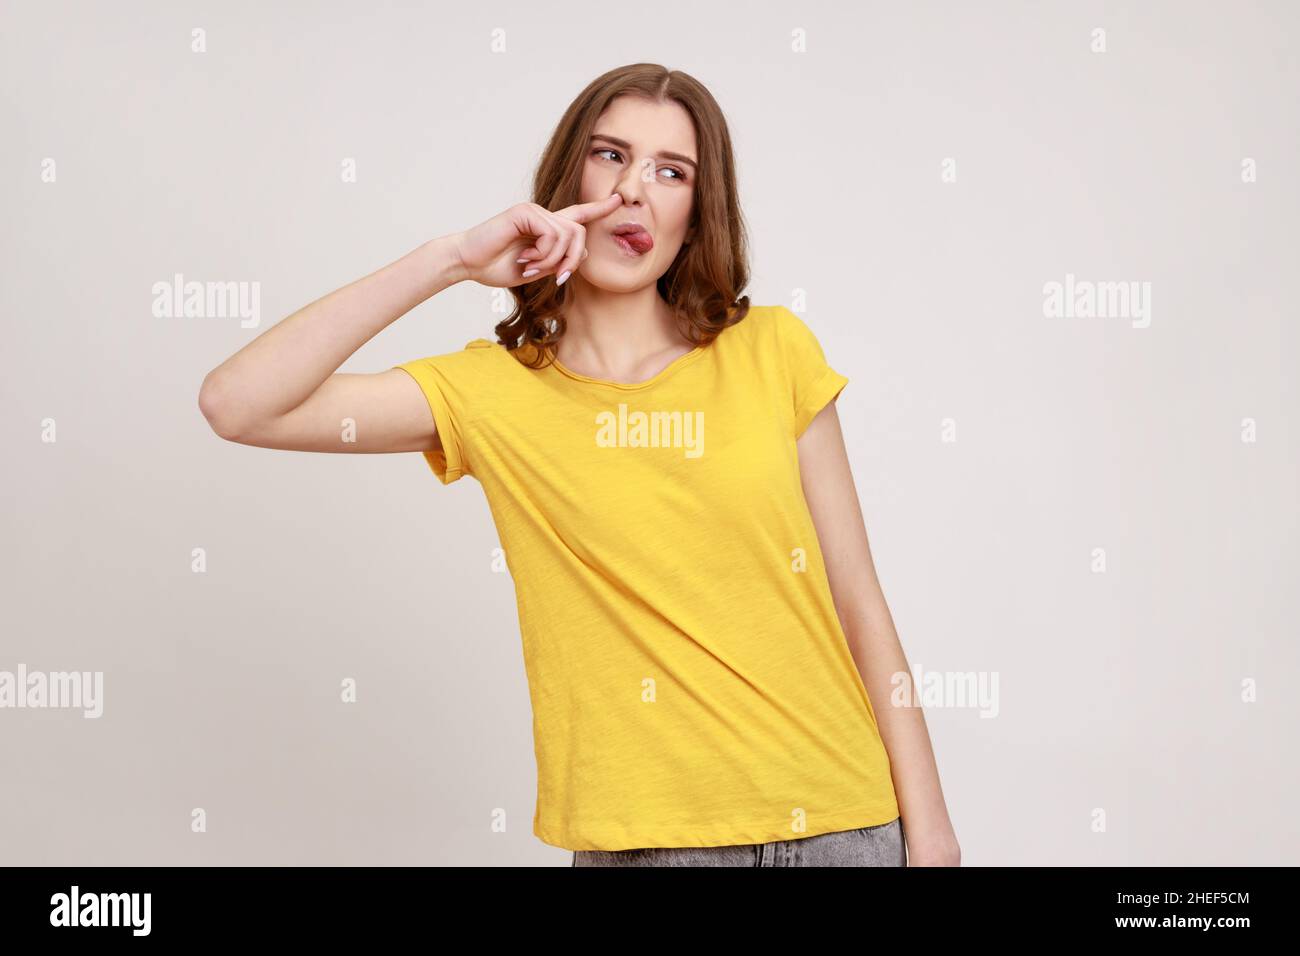 Funny comical teenager girl with brown hair picking finger to nose and showing tongue, looking at away, having fun, fooling around, bad manners. Indoor studio shot isolated on gray background. Stock Photo